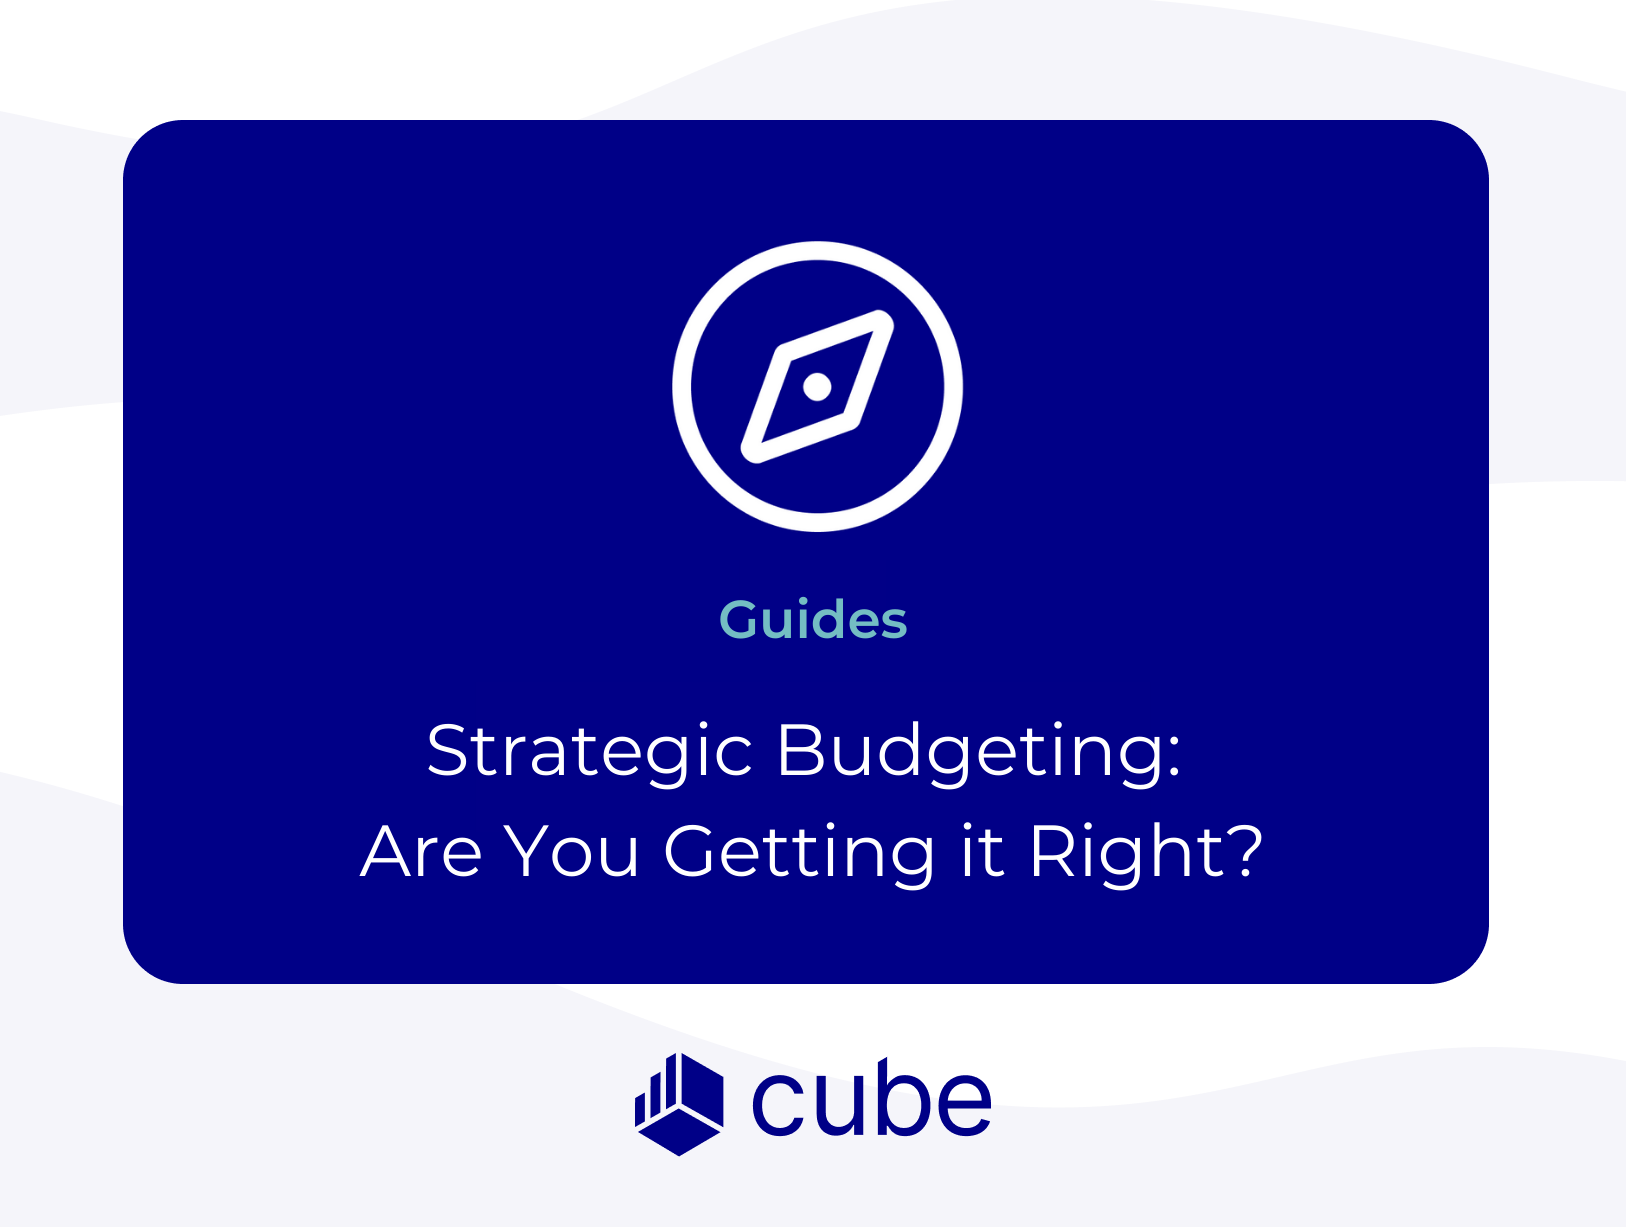 Strategic Budgeting: Are You Getting it Right? A Guide for 2022